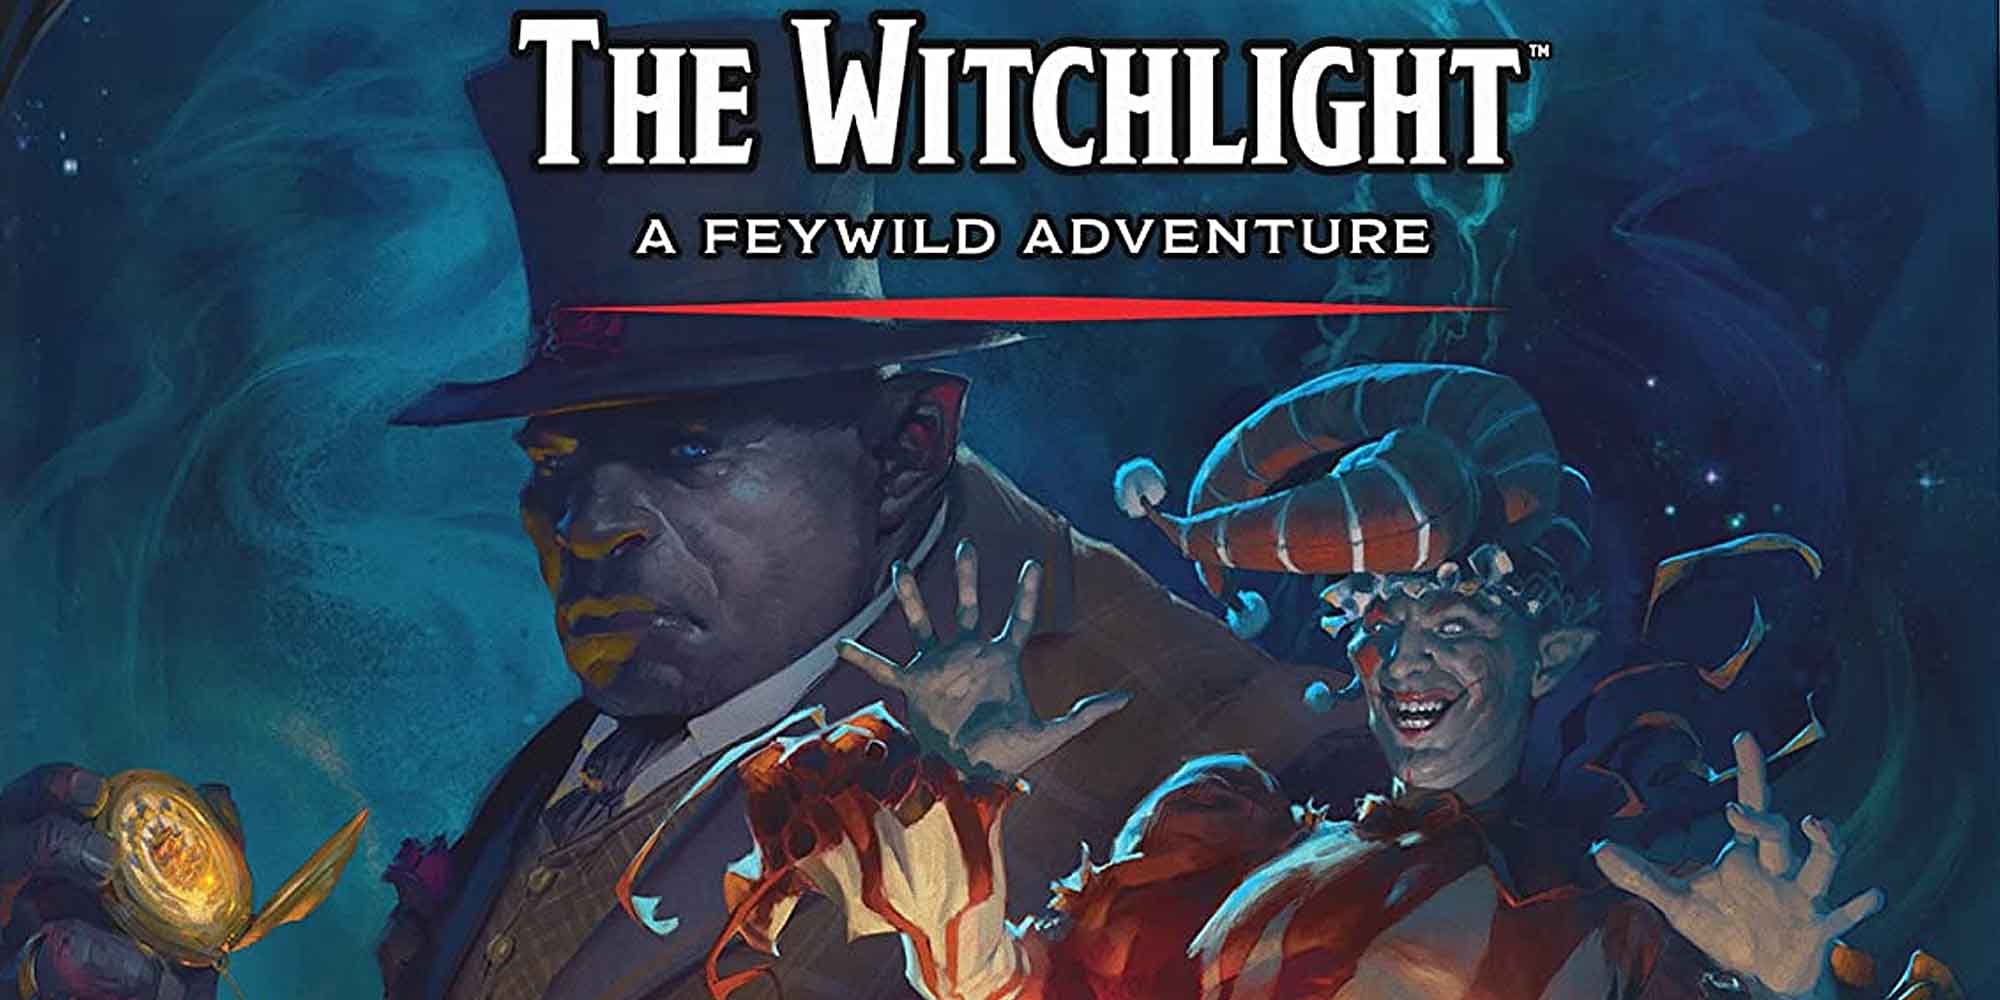 The Witchlight Dungeons and Dragons campaign